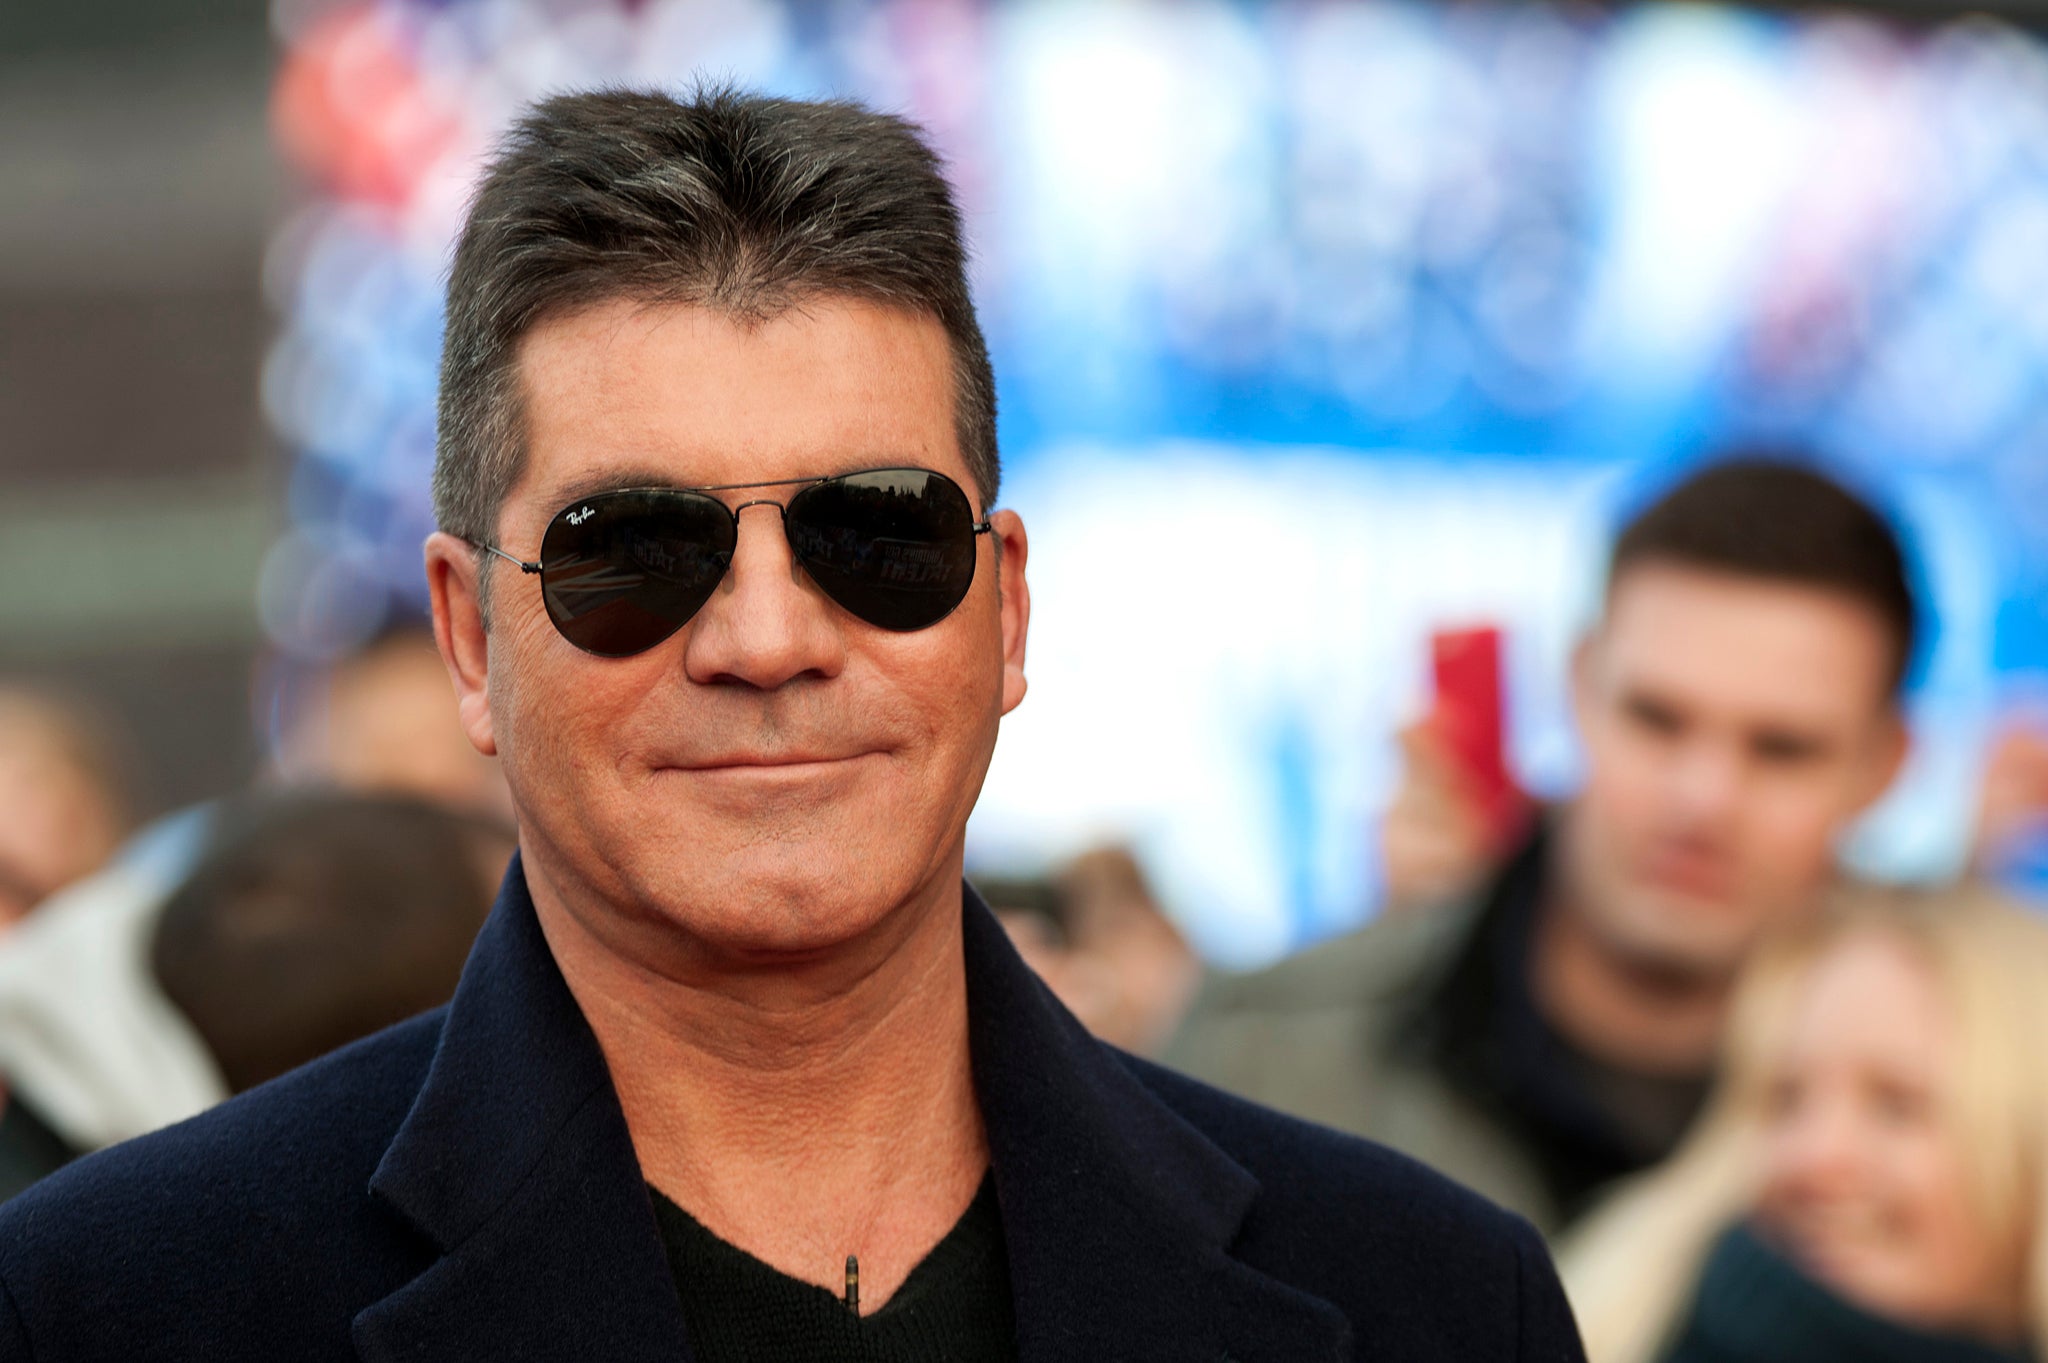 Simon Cowell may be back on our screens for the next series of The X Factor